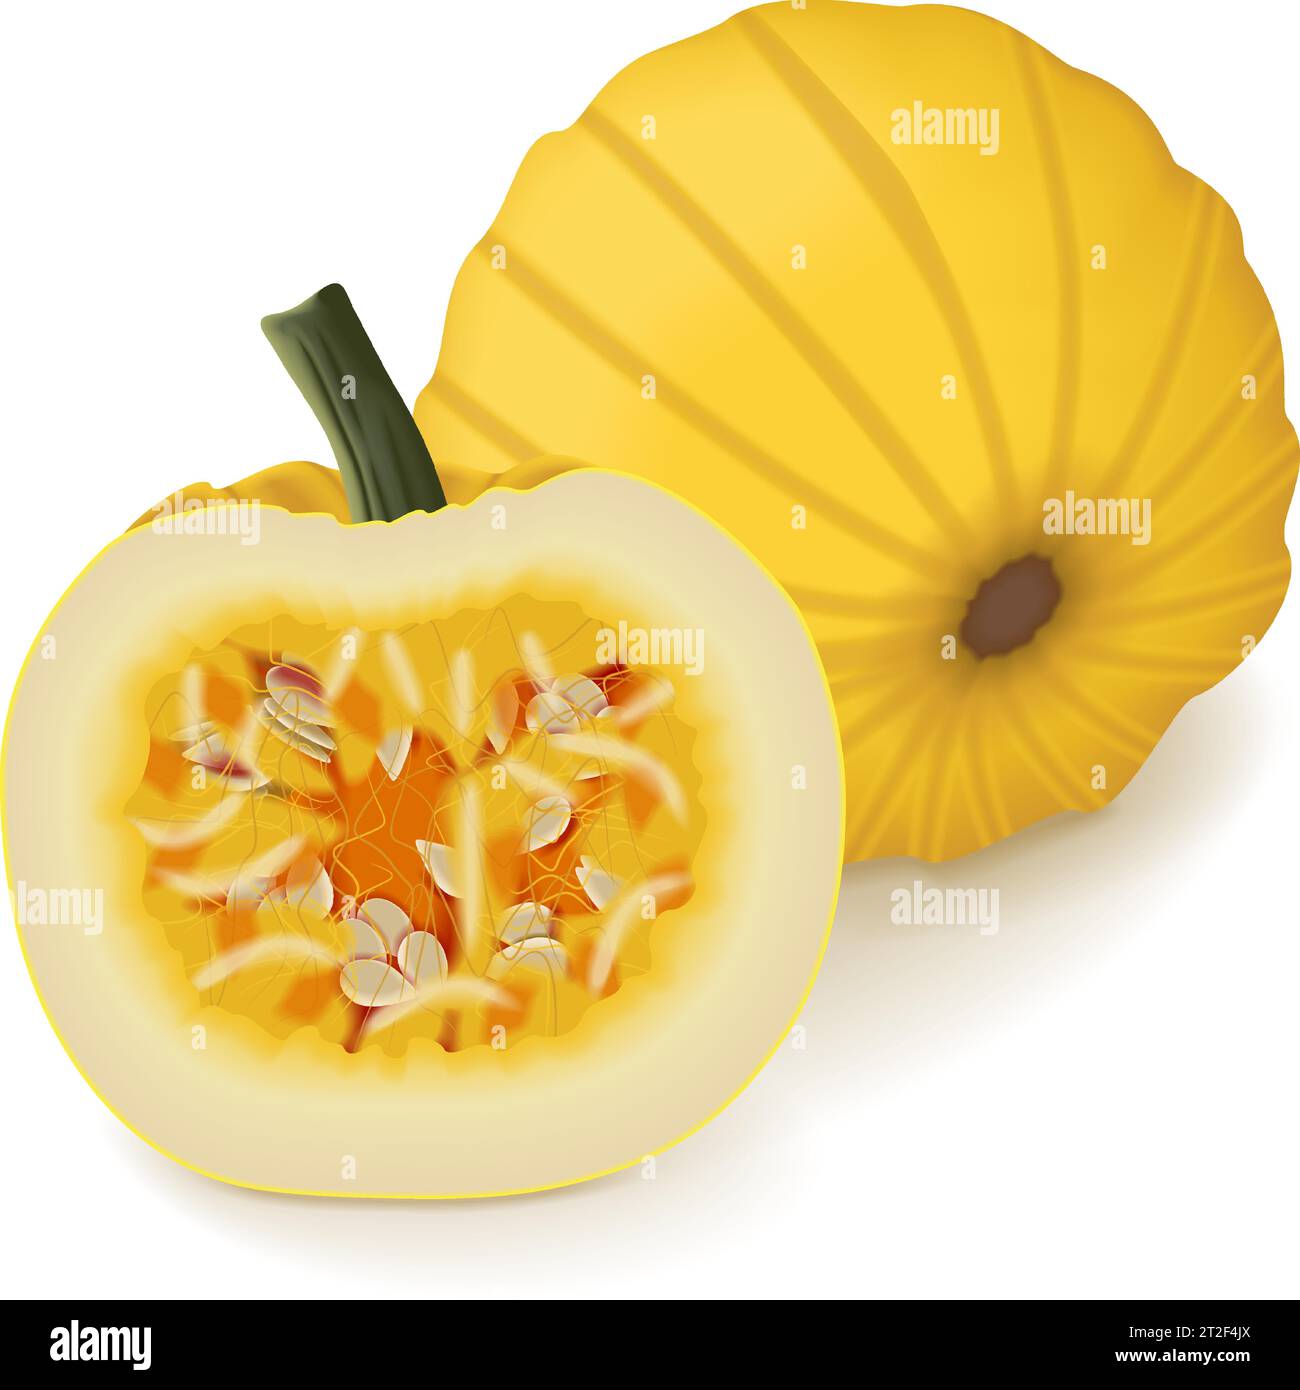 Whole and half of Mellow Yellow Pumpkin. Winter squash. Cucurbita pepo. Fruits and vegetables. Isolated vector illustration. Stock Vector